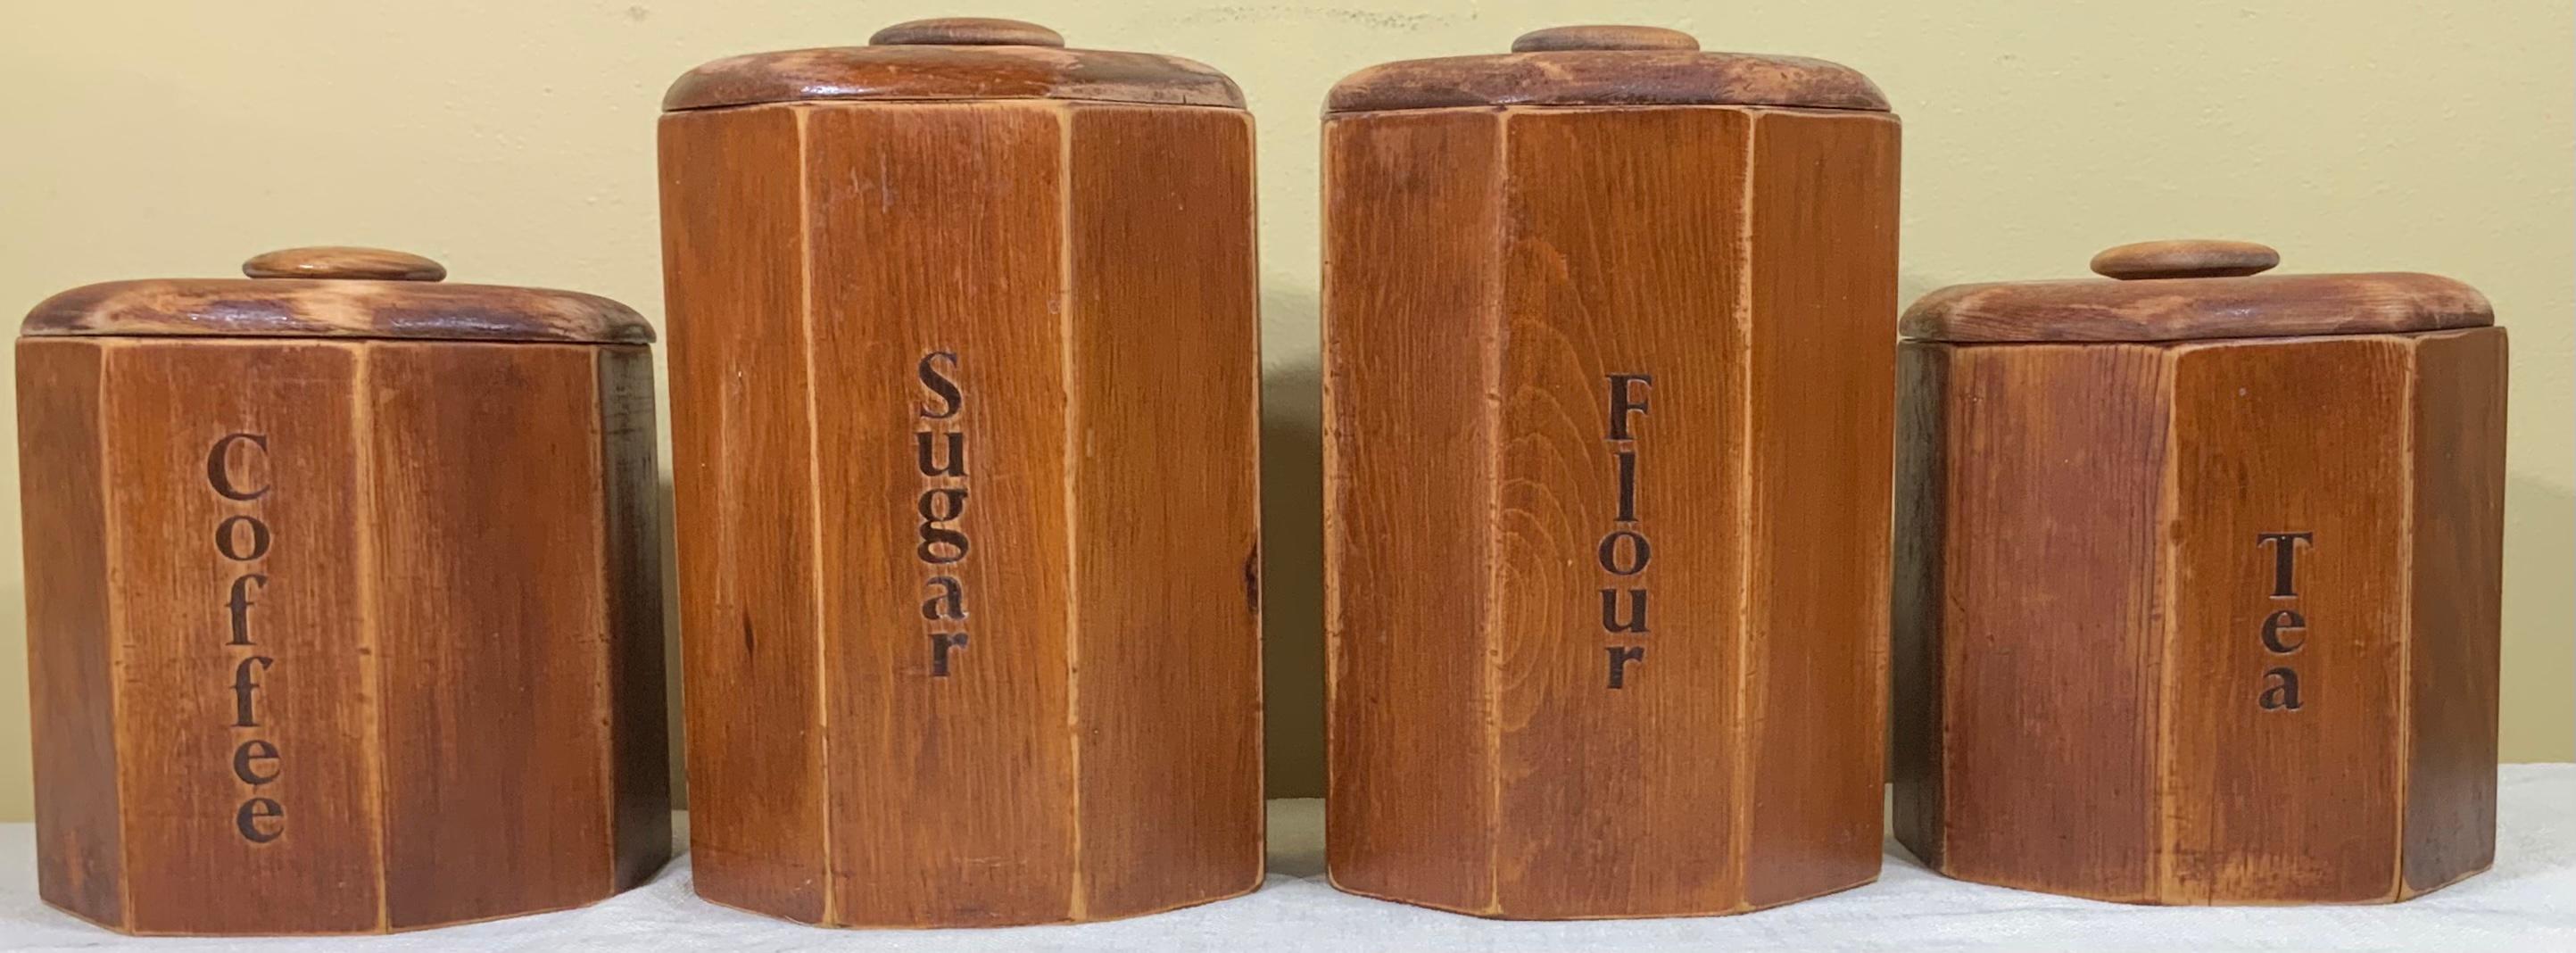 unique containers hand crafted from Cypress wood artistic craftsmanship the lid comes off and each has acrylic container in . 
Originally came from old wood cabin. Decorative addition to any kitchen.
2 pieces size : 6”25 x 9”
2 pieces size :